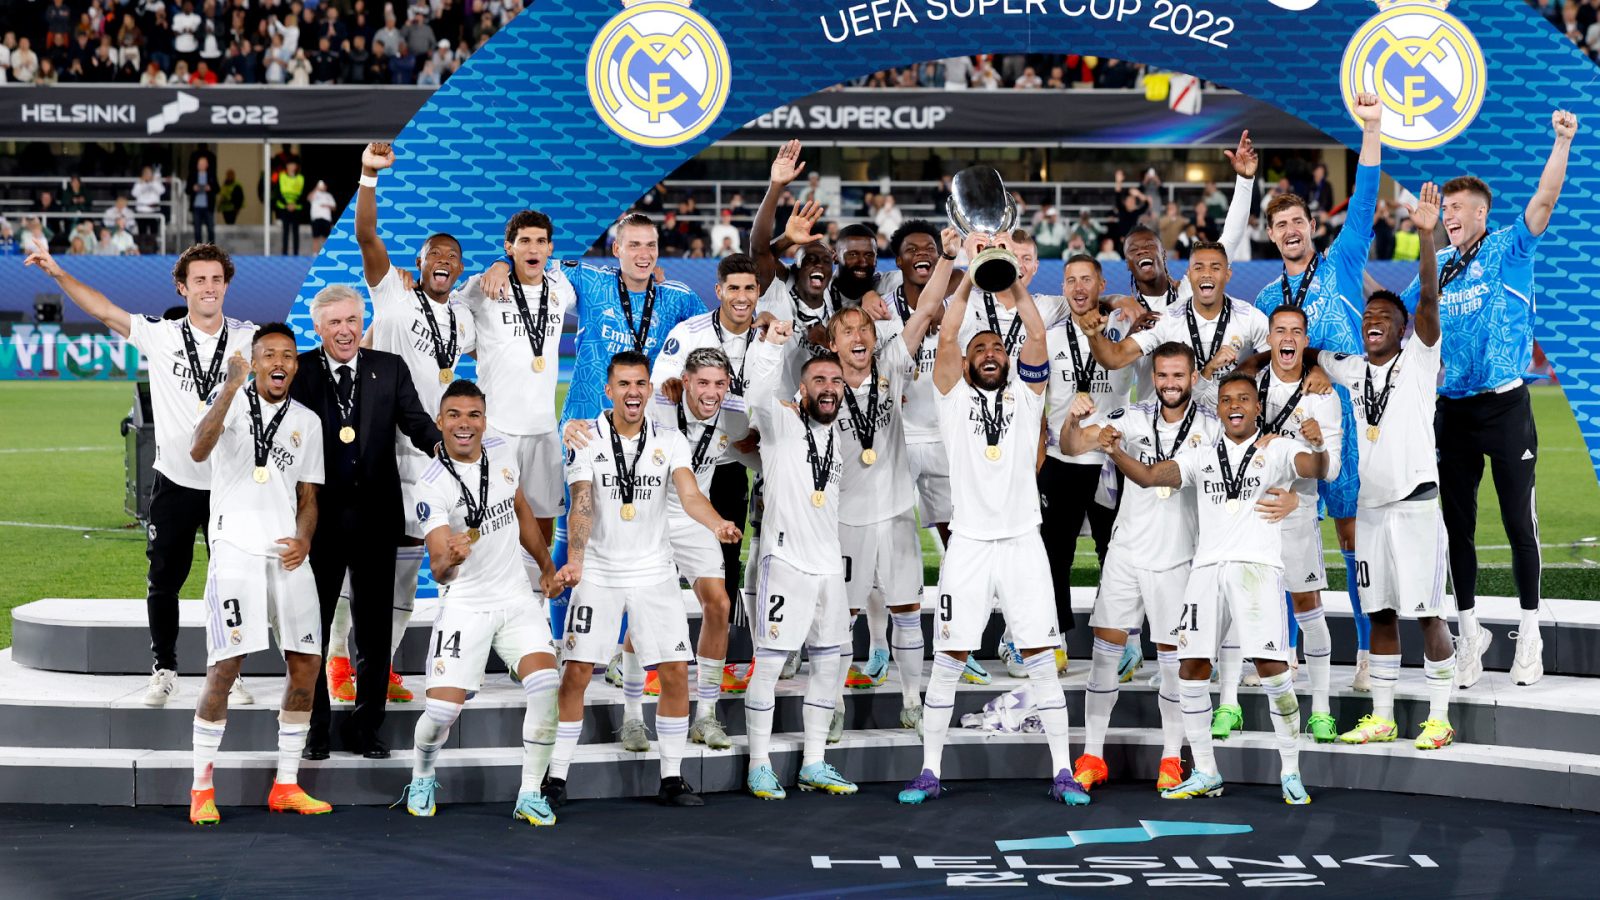 Real Madrid win the Super Cup